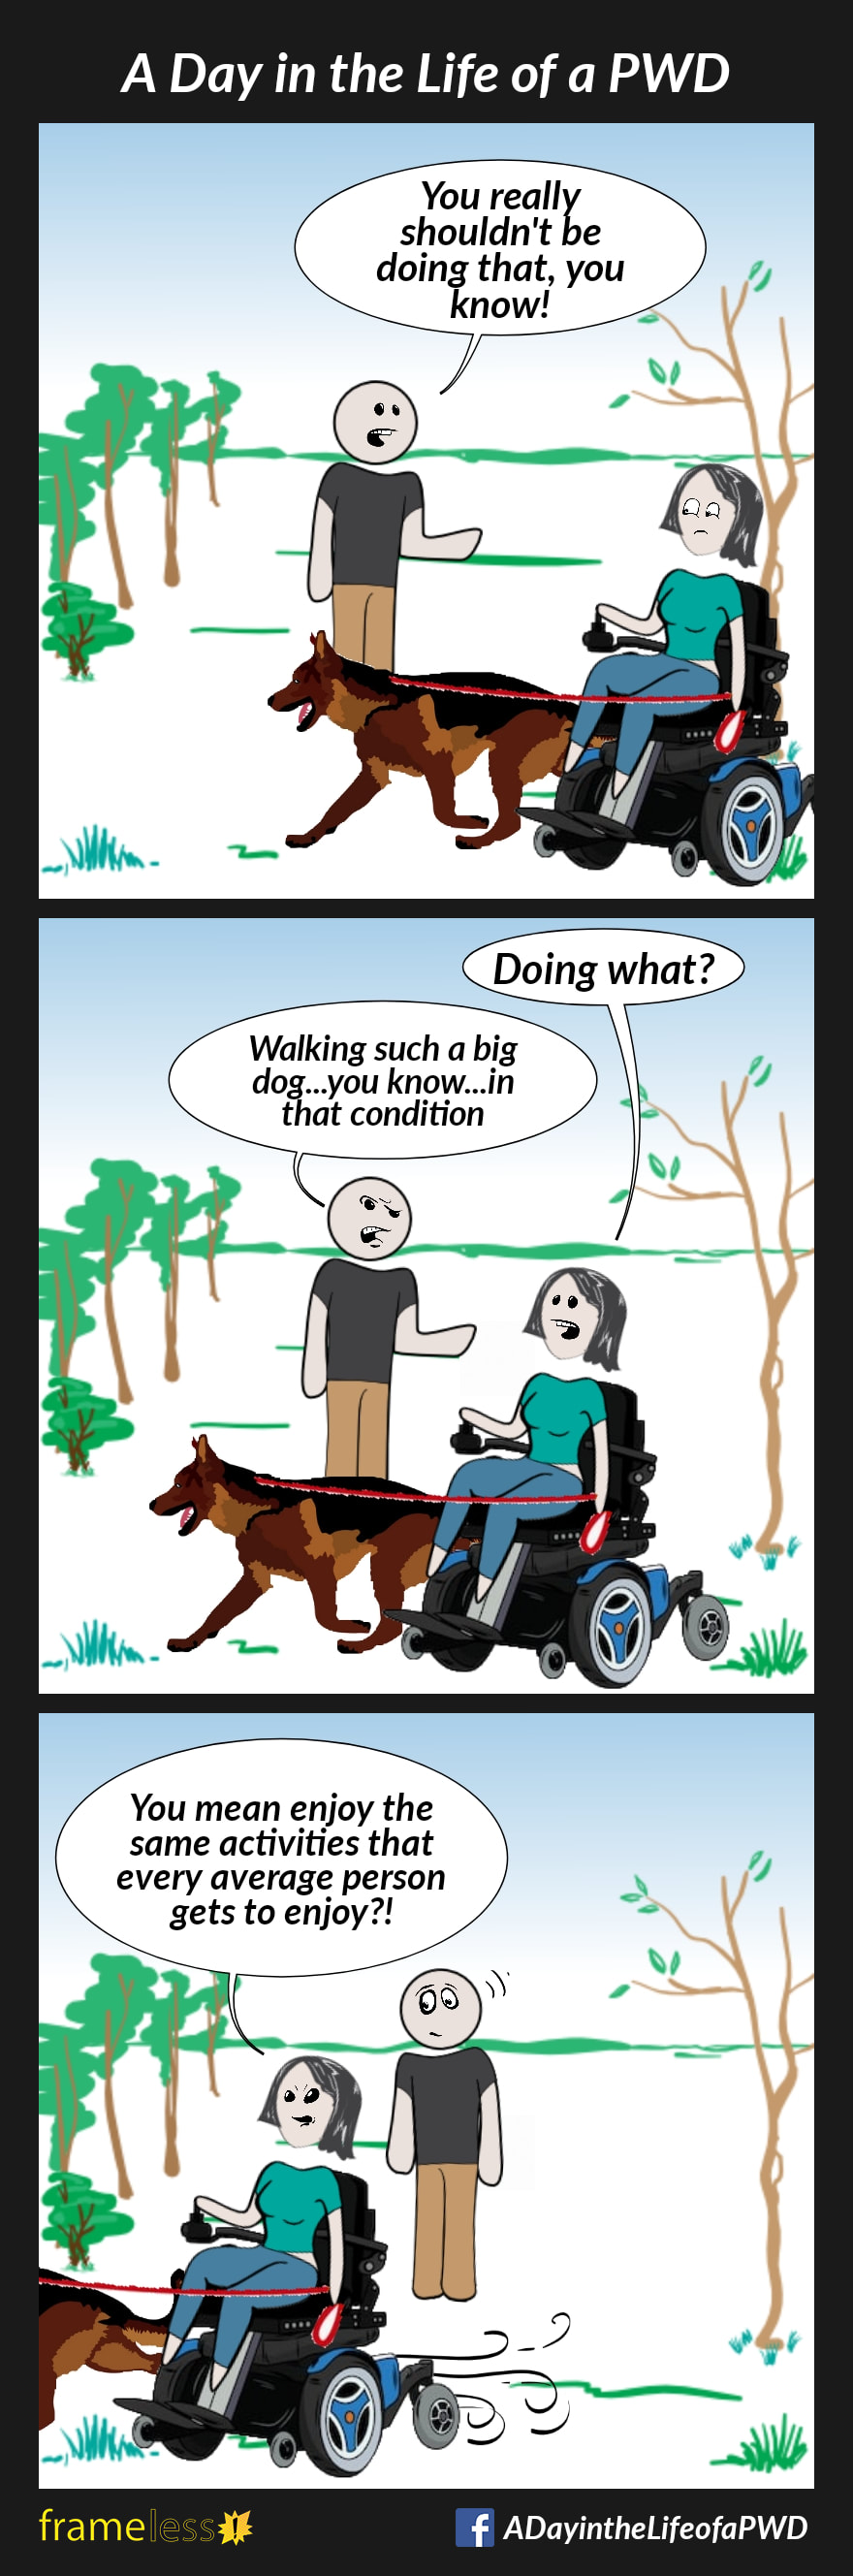 COMIC STRIP 
A Day in the Life of a PWD (Person With a Disability) 

Frame 1:
A woman in a power wheelchair is walking her dog through a park. A man approaches her.
MAN: You really shouldn't be doing that, you know!

Frame 2:
WOMAN: Doing what?
MAN: Walking such a big dog...you know...in that condition.

Frame 3:
WOMAN (driving away, irritated): You mean enjoy the same activities that every average person gets to enjoy?!